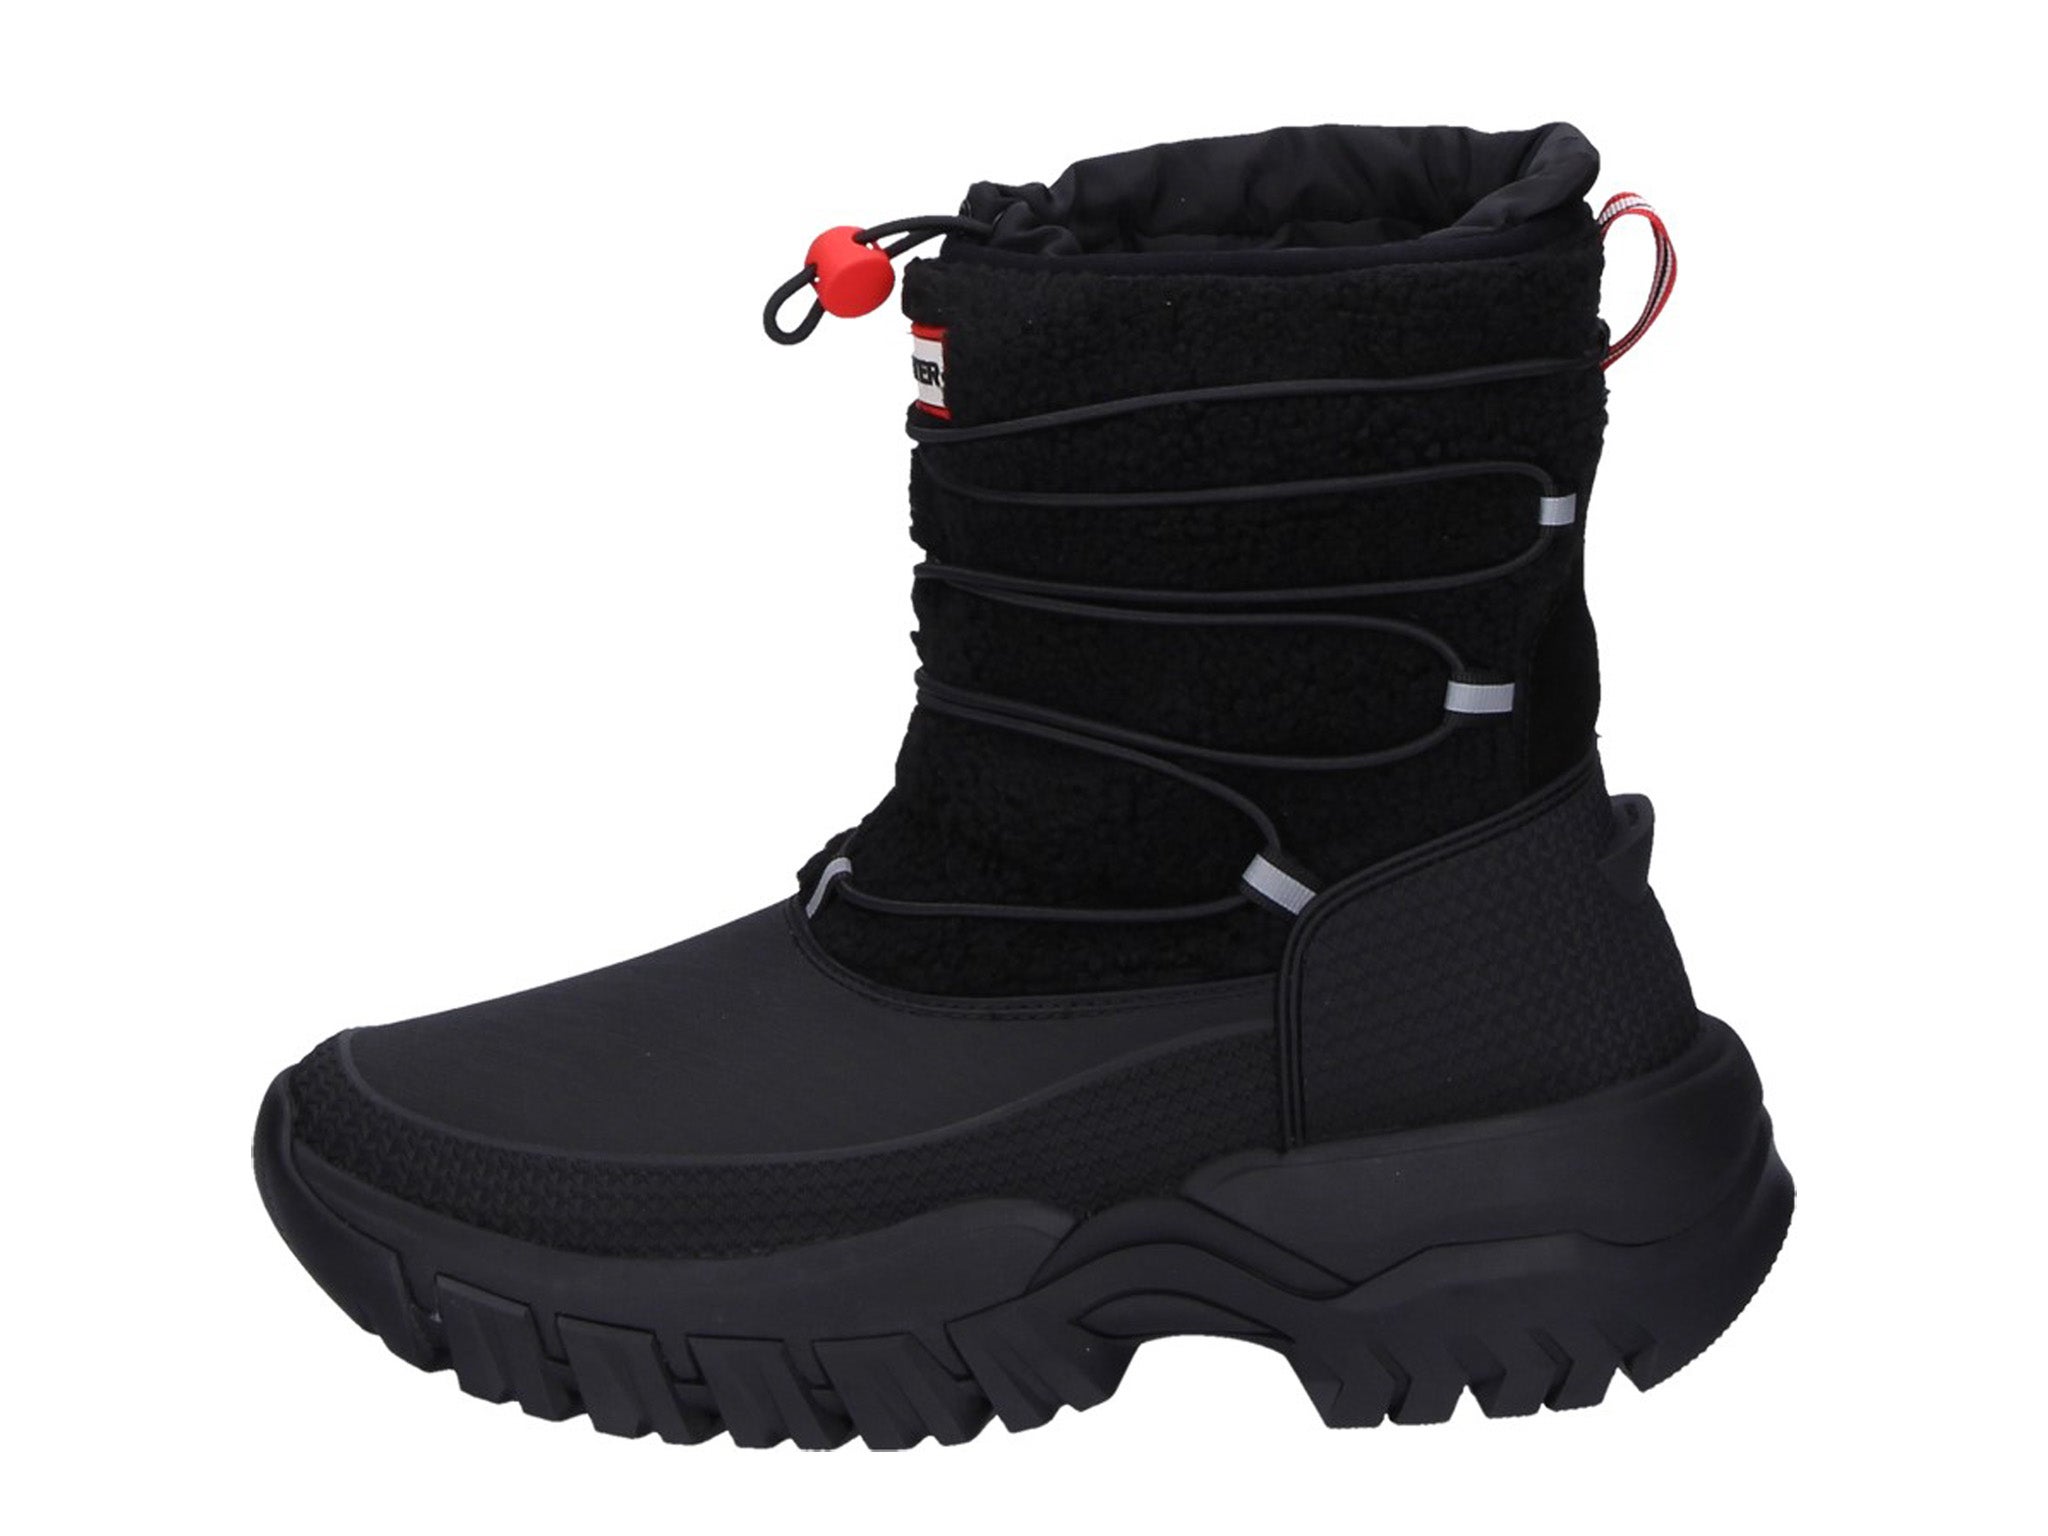 Best women’s snow boots 2023 tried and tested | The Independent